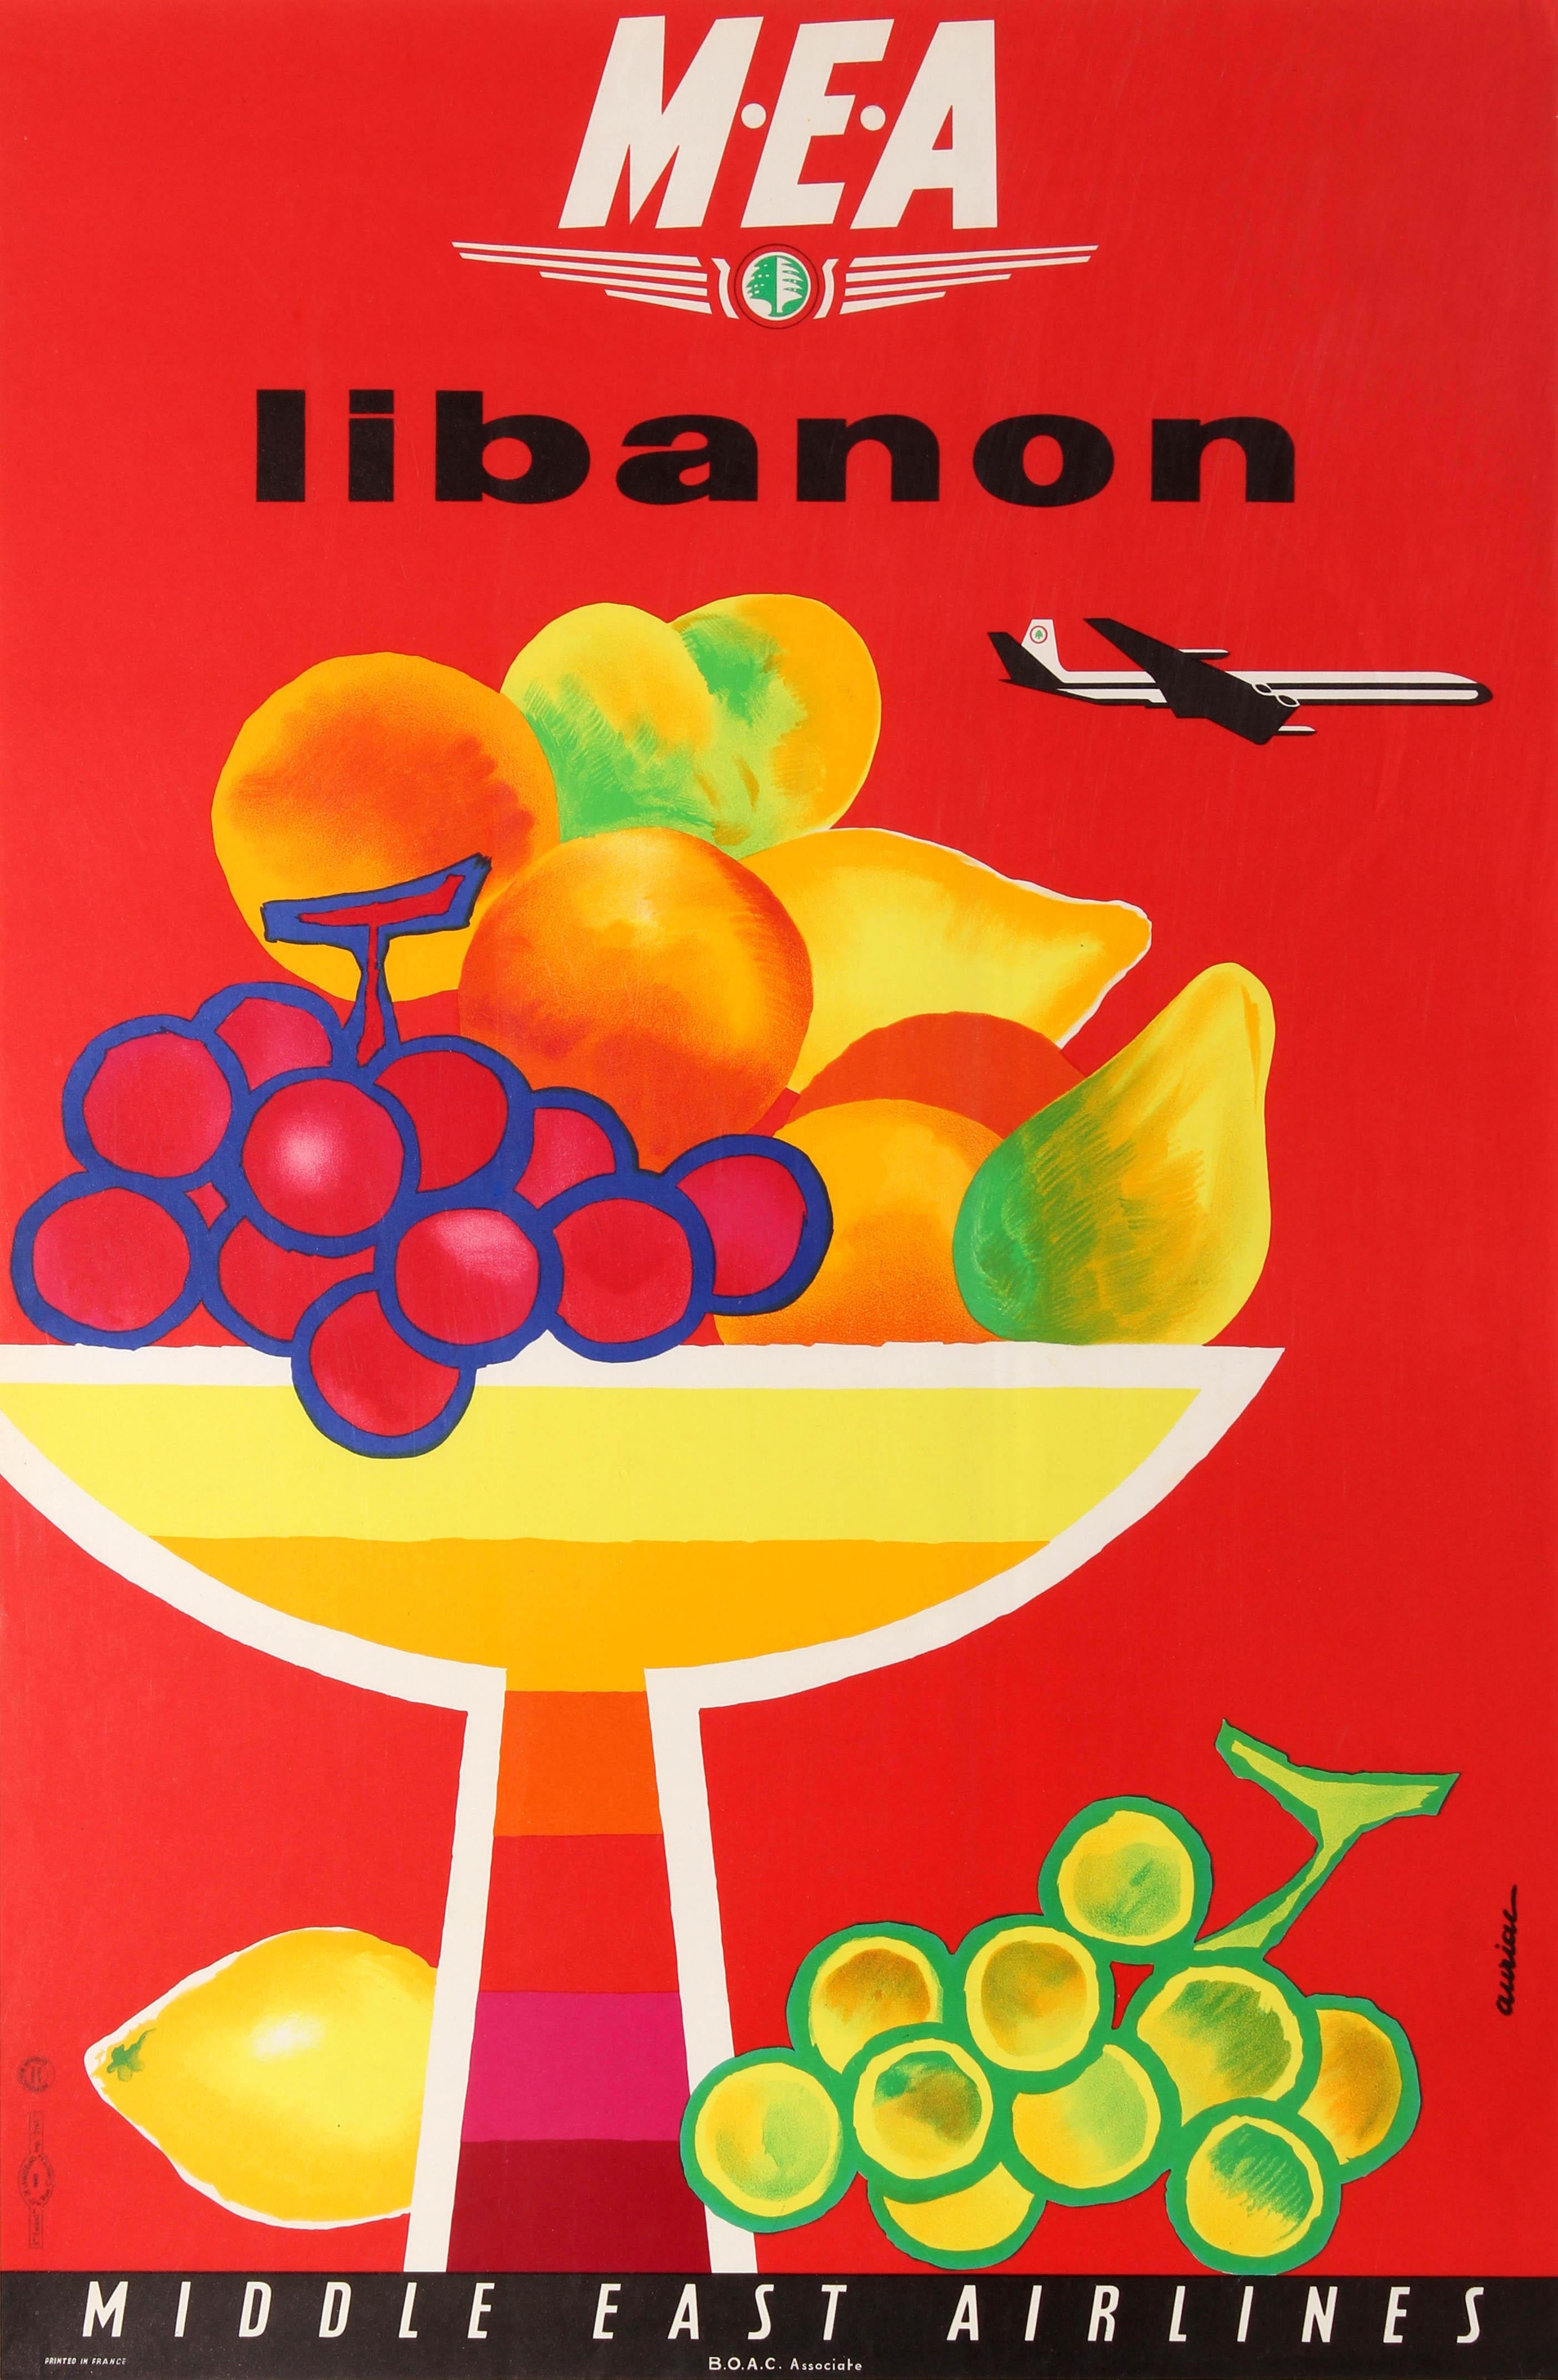 Jacques Auriac Print - Original Vintage Travel Poster For Libanon Lebanon MEA Middle East Airlines BOAC